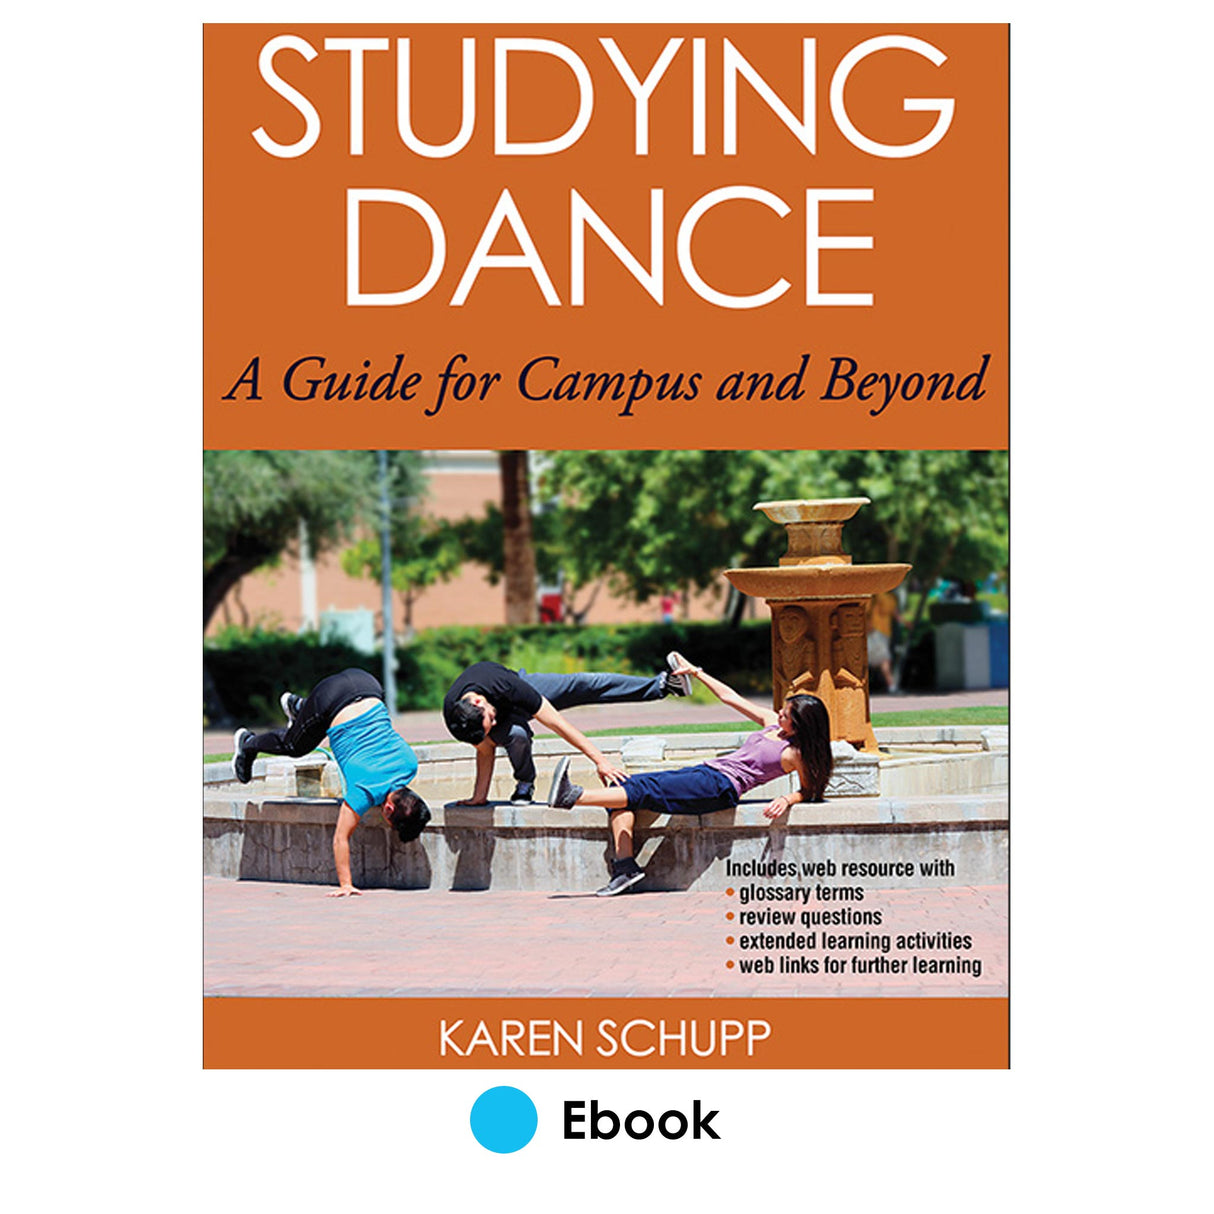 Studying Dance PDF With Web Resource